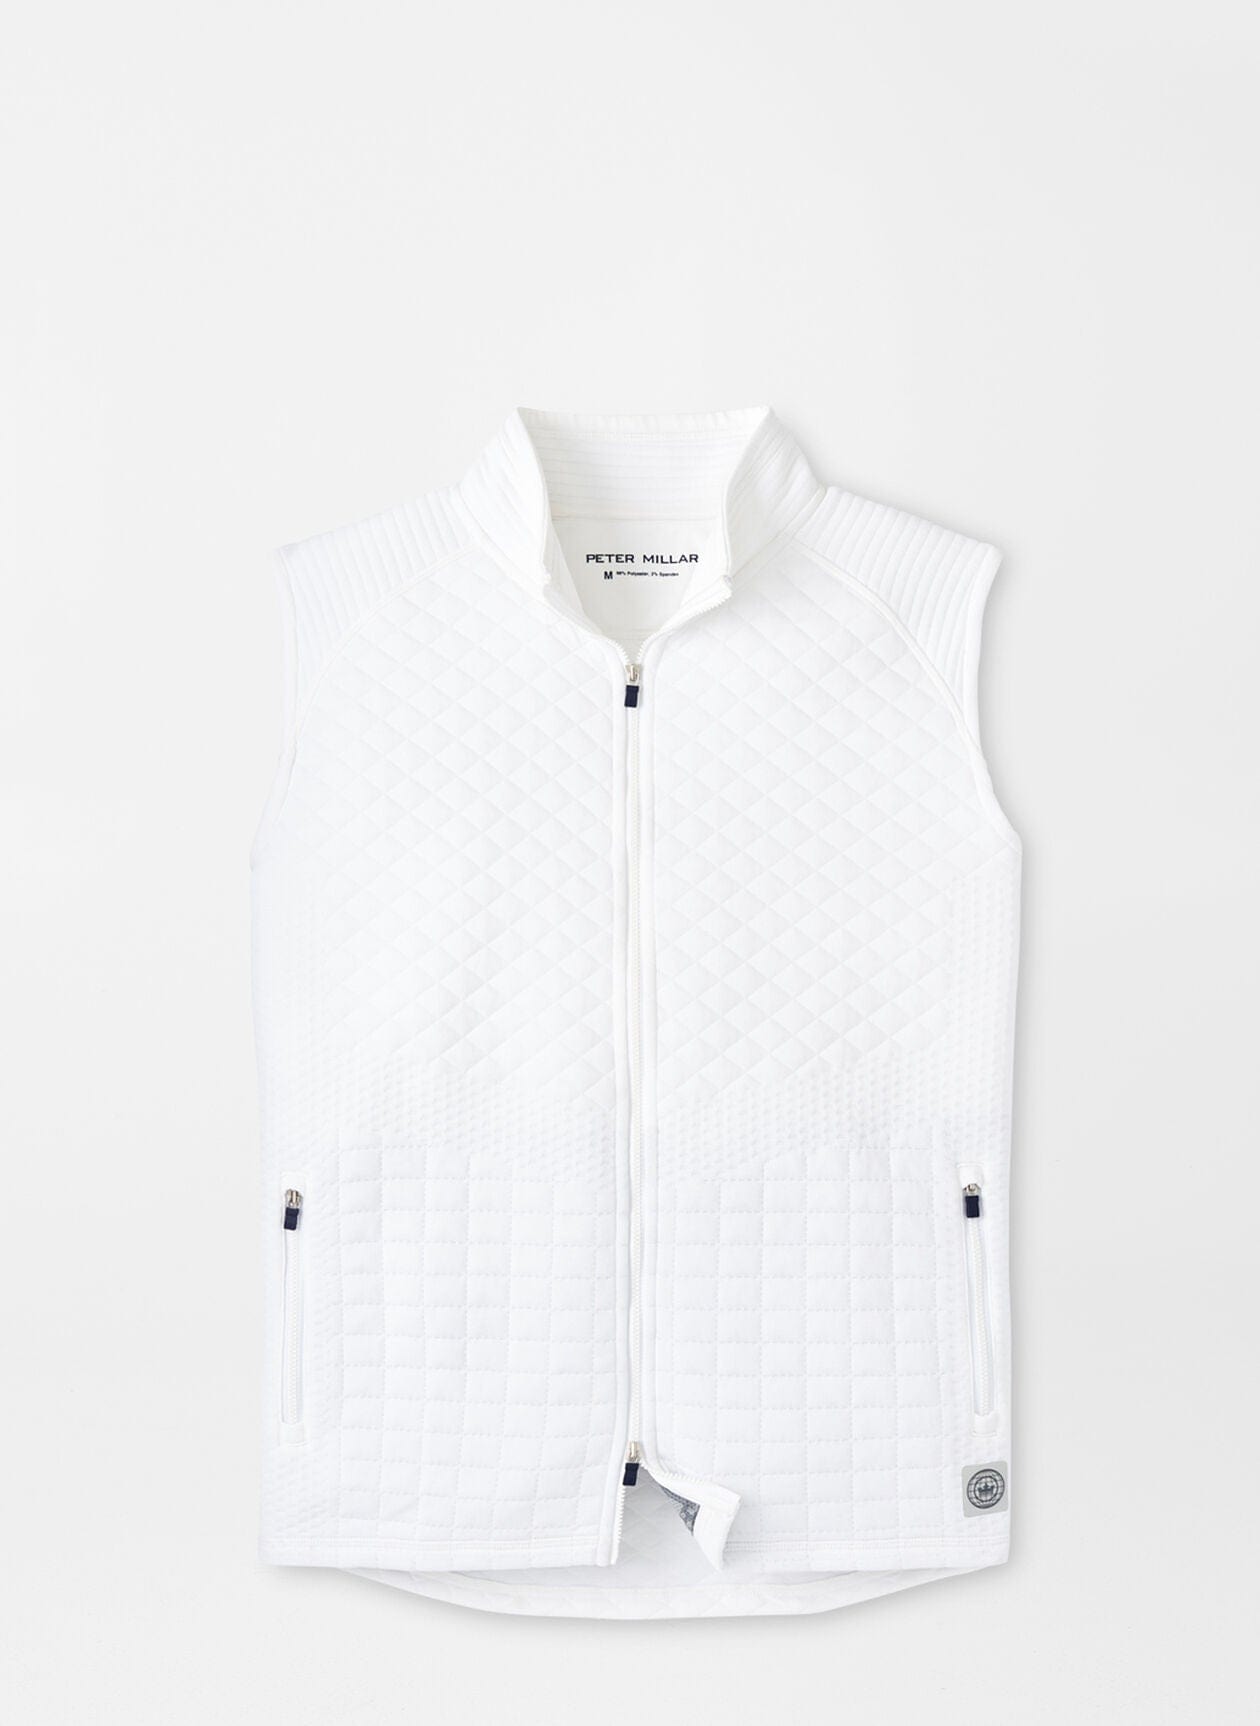 PETER MILLAR OUTERWEAR - VEST WHITE / XL ORION PERFORMANCE QUILTED VEST